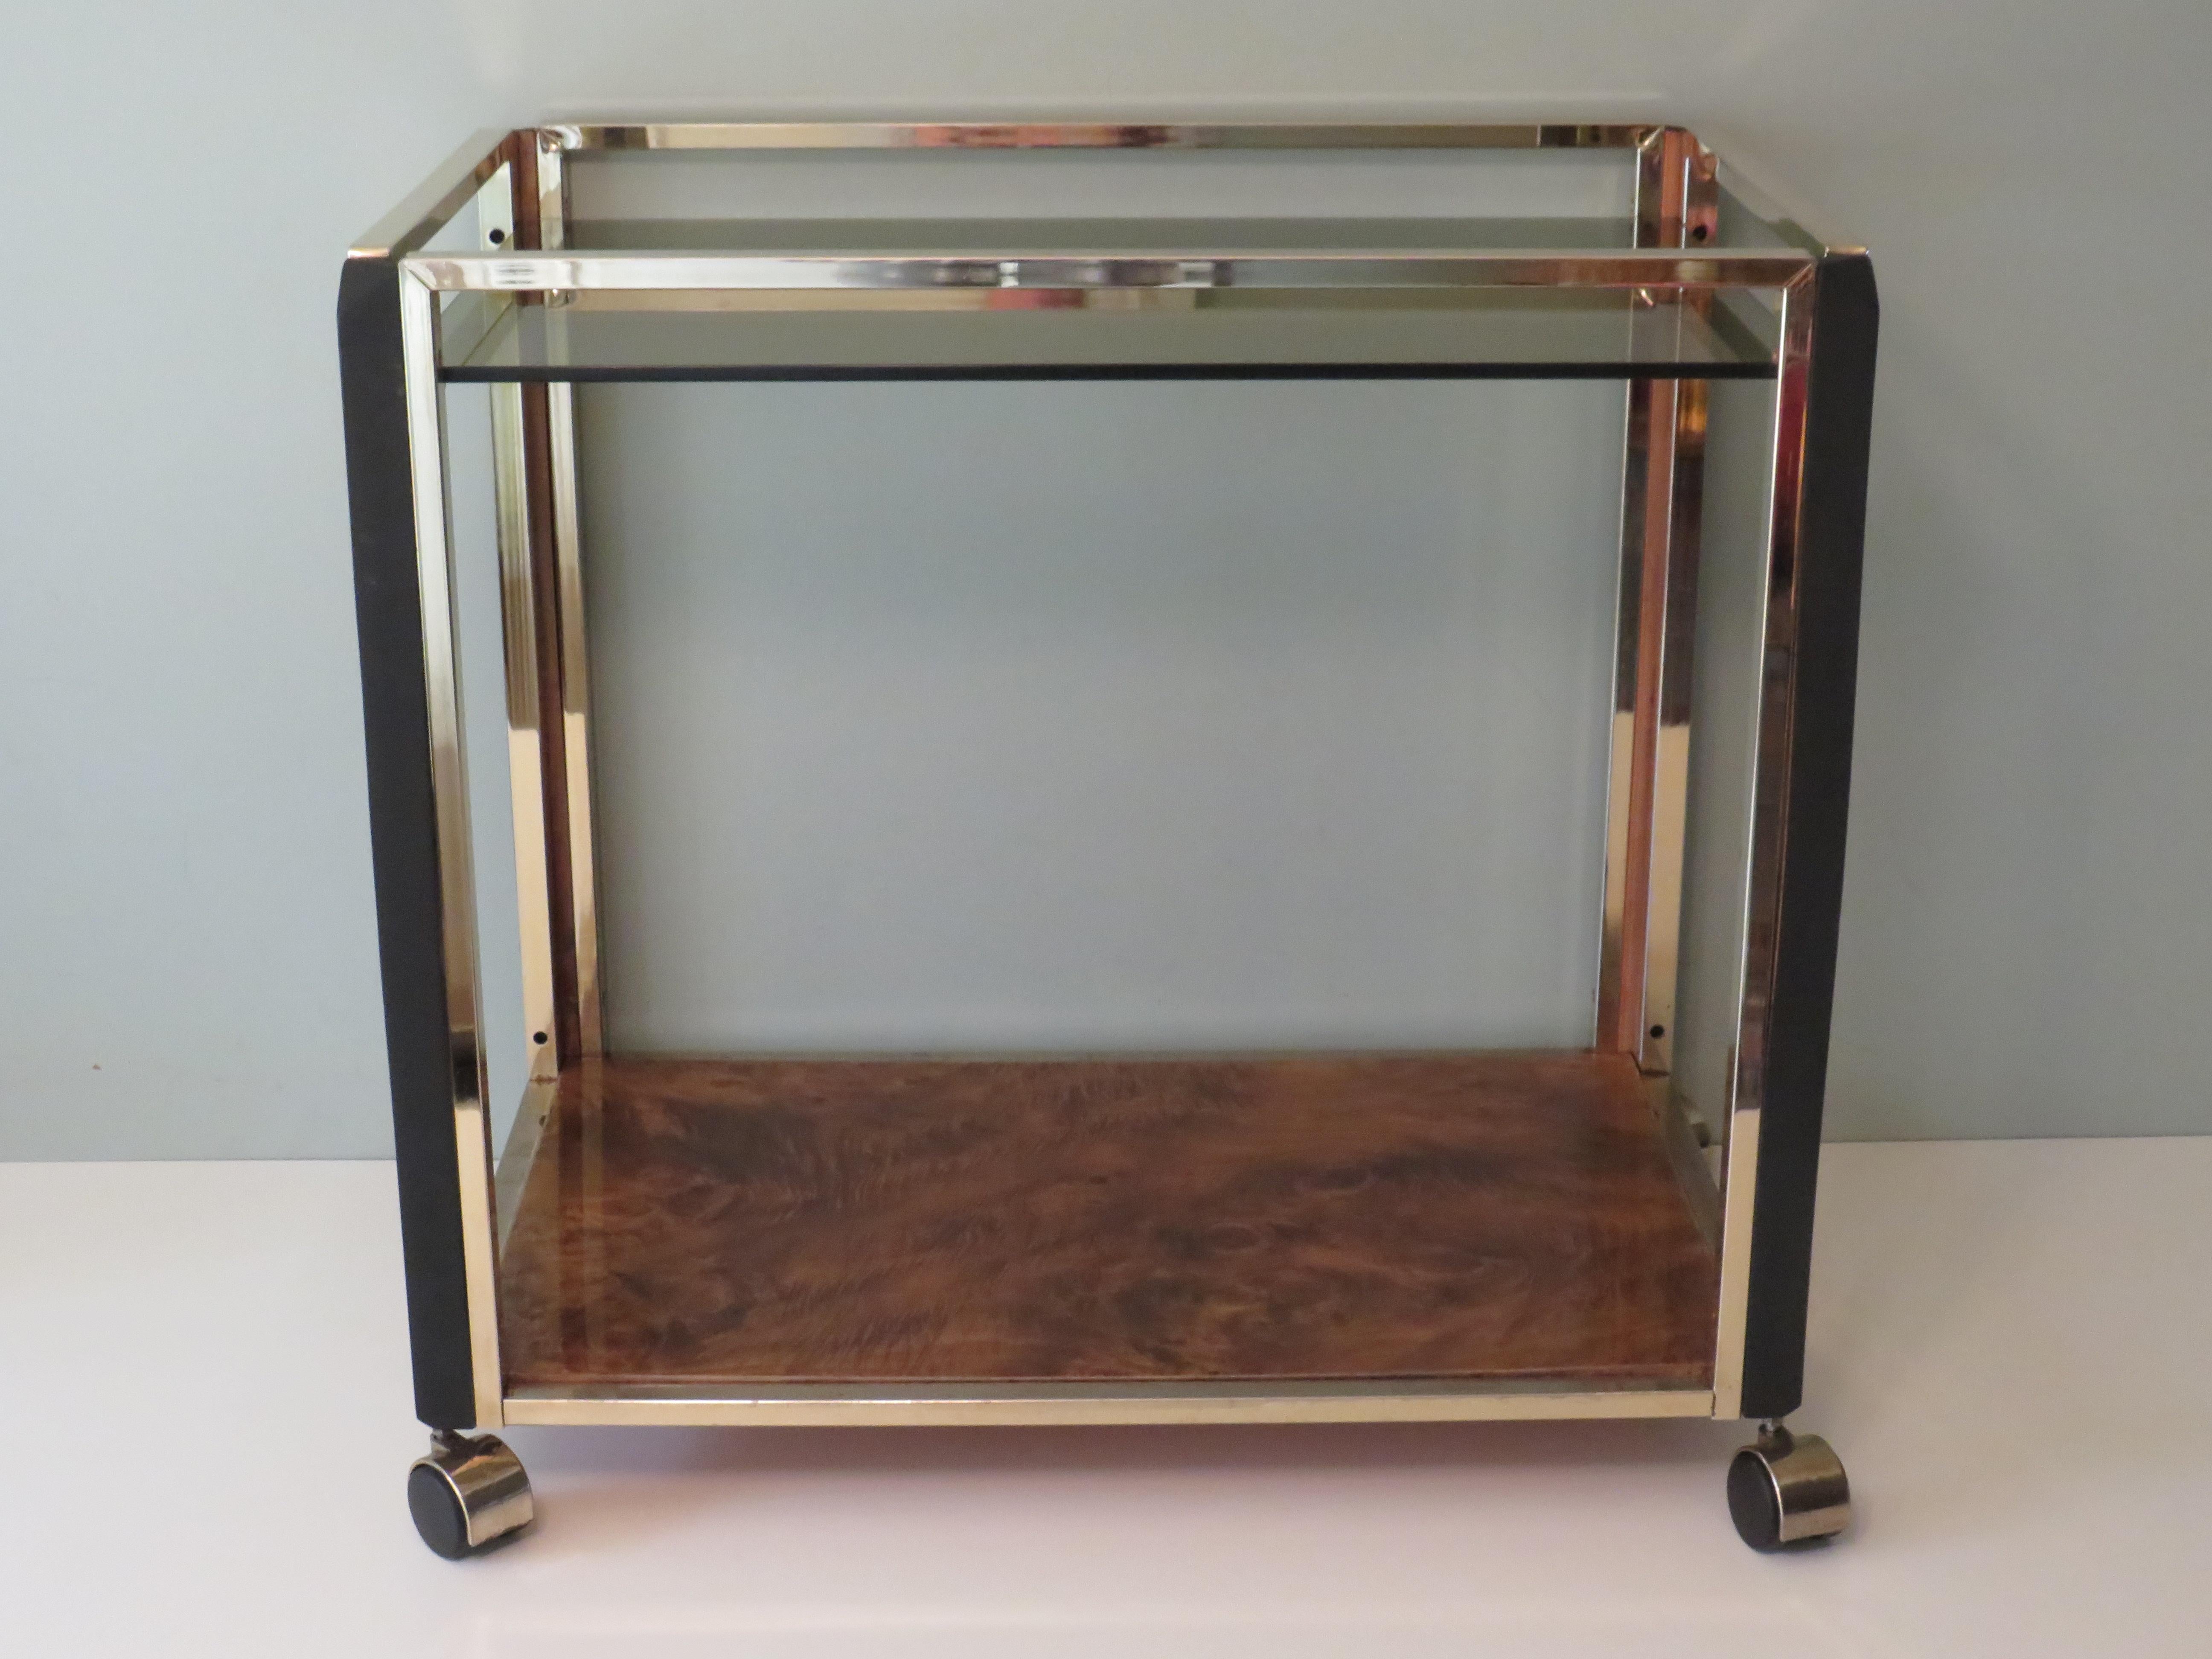 The trolley has a gold-plated frame.
The corners of the trolley are made of black (mat) lacquered wood.
The lower top has a burlwood veneer layer.
The top is made of fumed glass with a thickness of 8 mm.